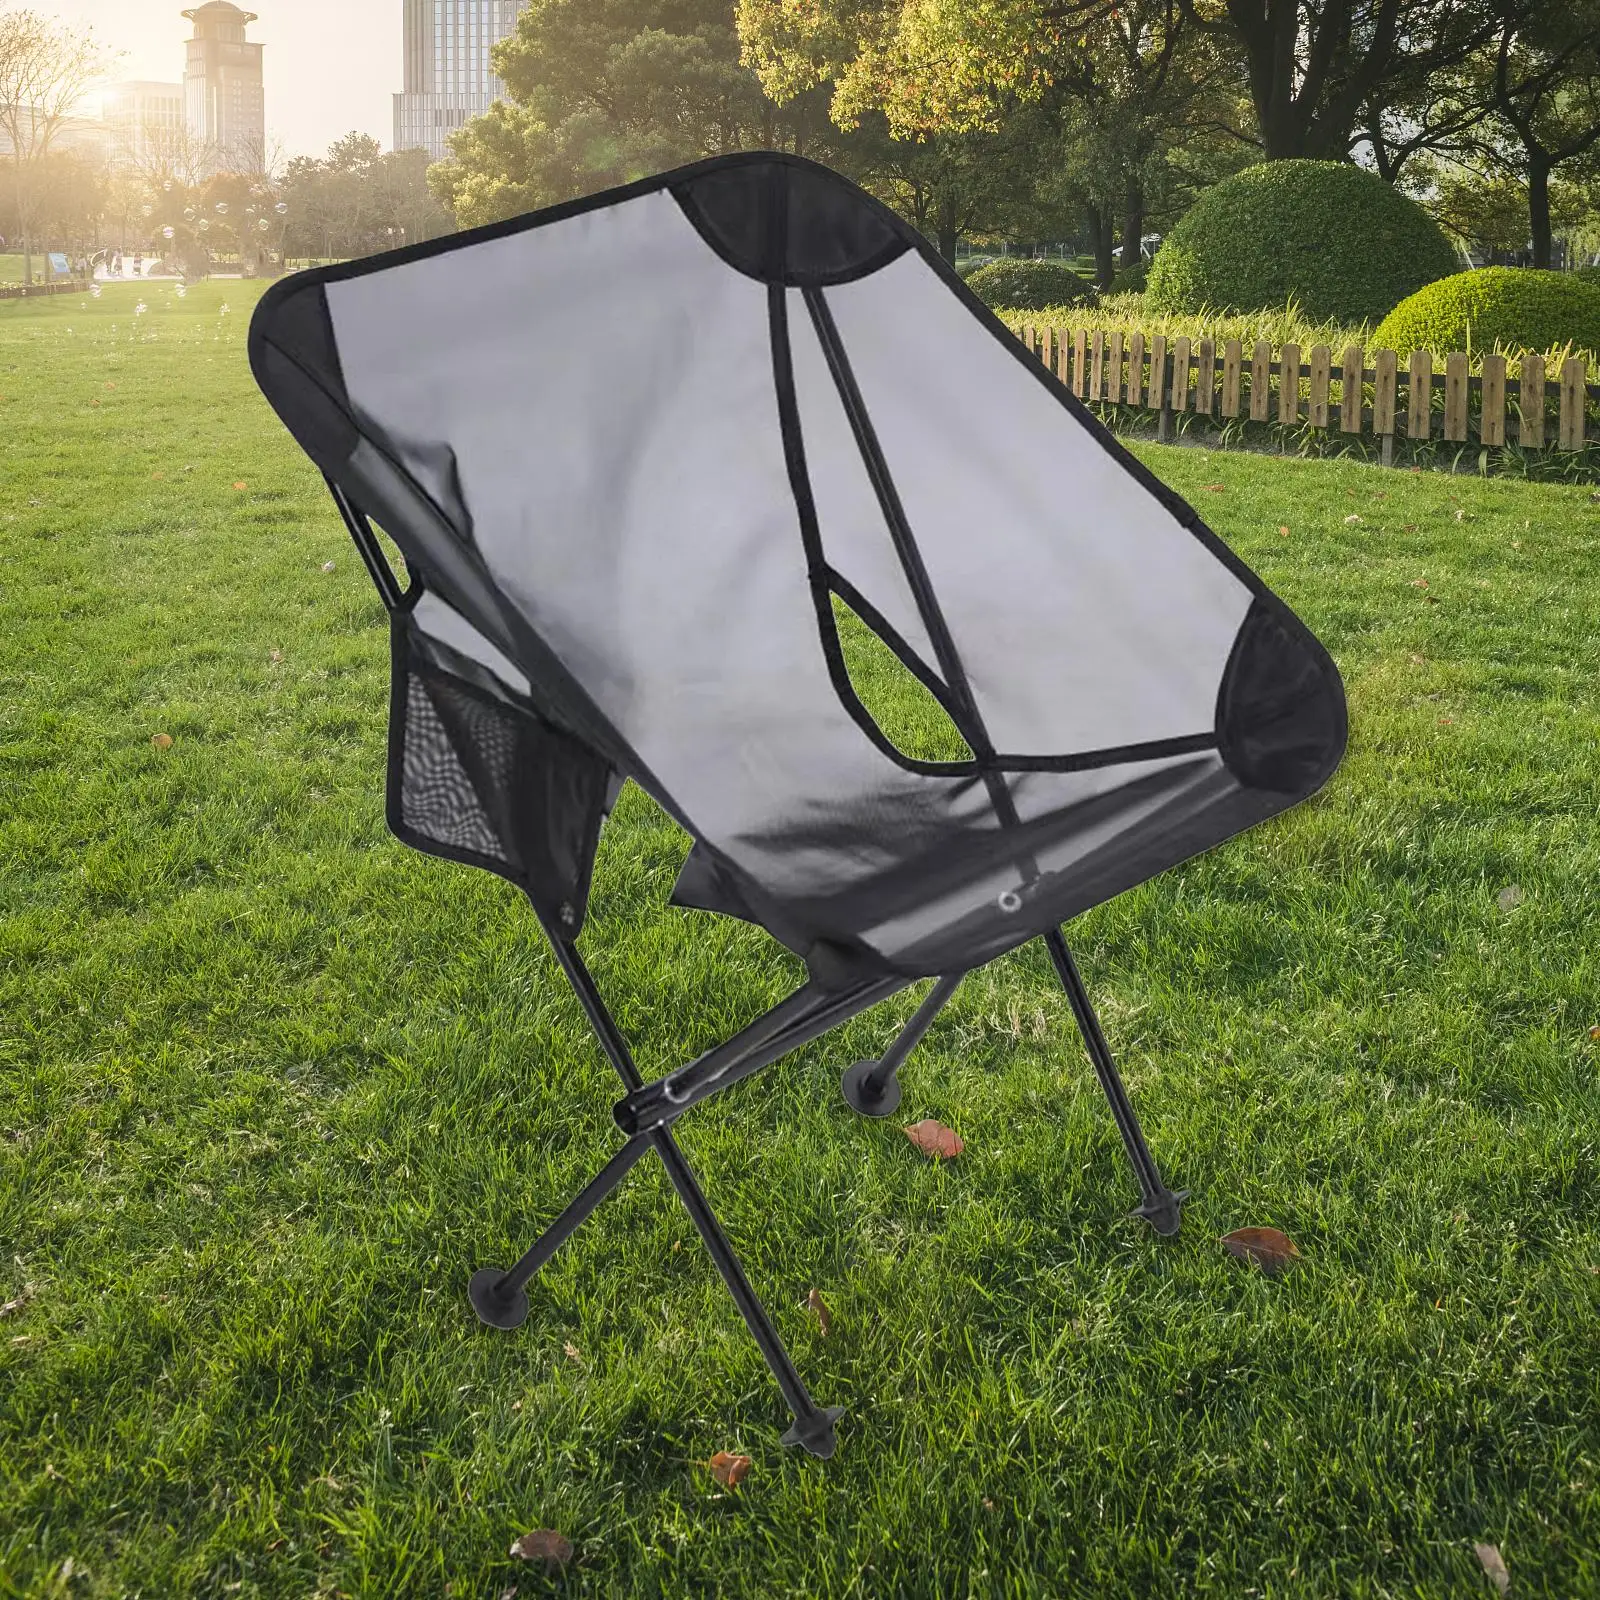 Folding Camping Chair Folding Chair for Park Backpacking Camping Accessory